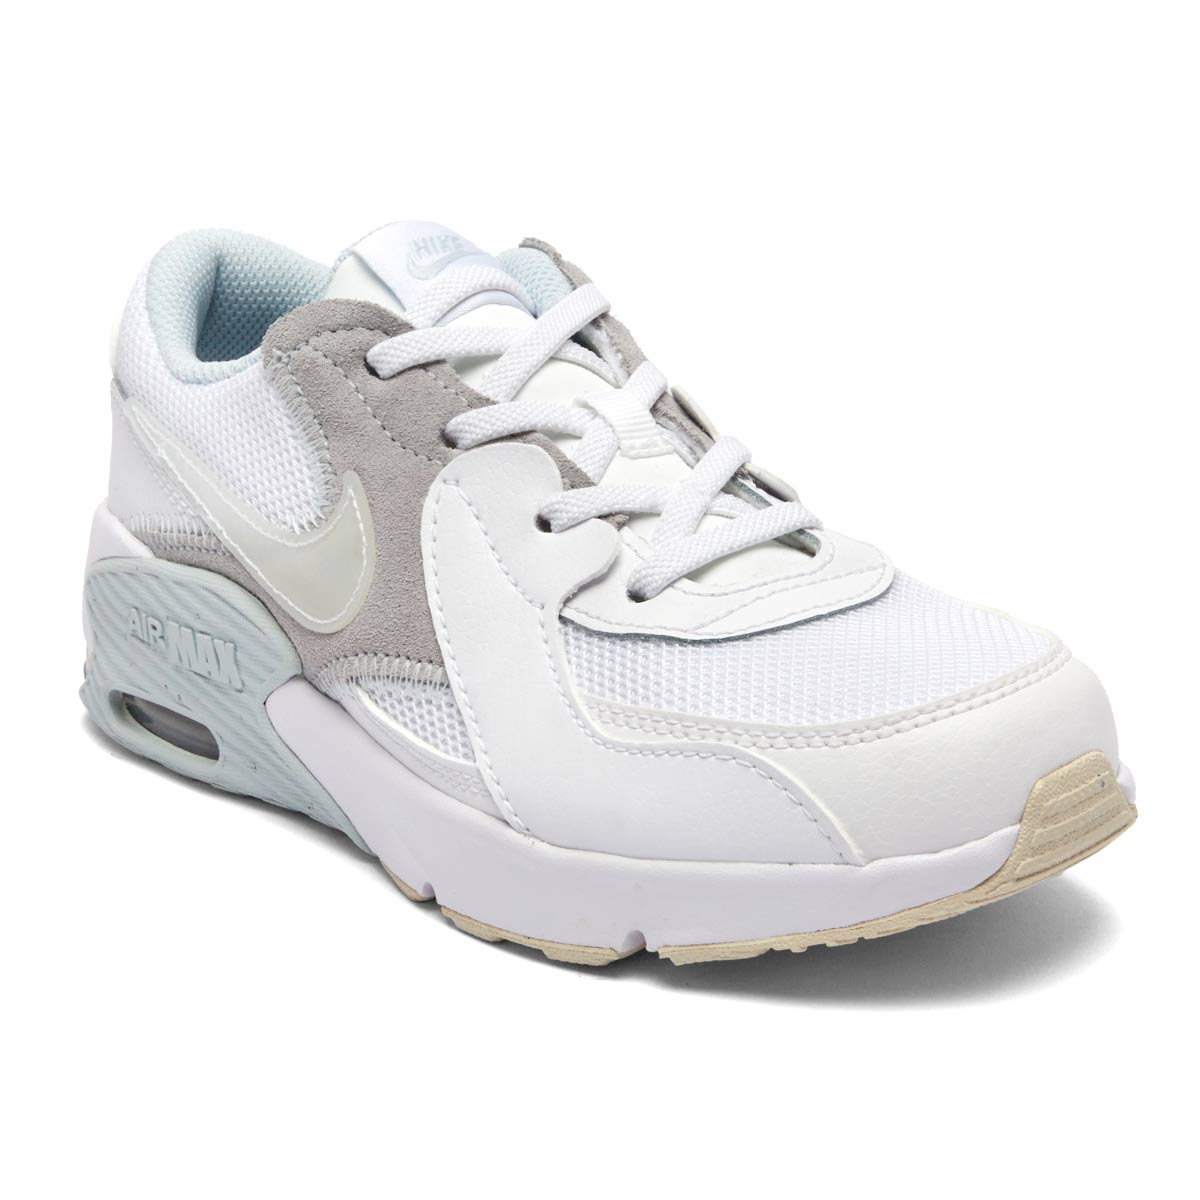 Excee – Air Sneaker Max Nike Youth PROOZY PS